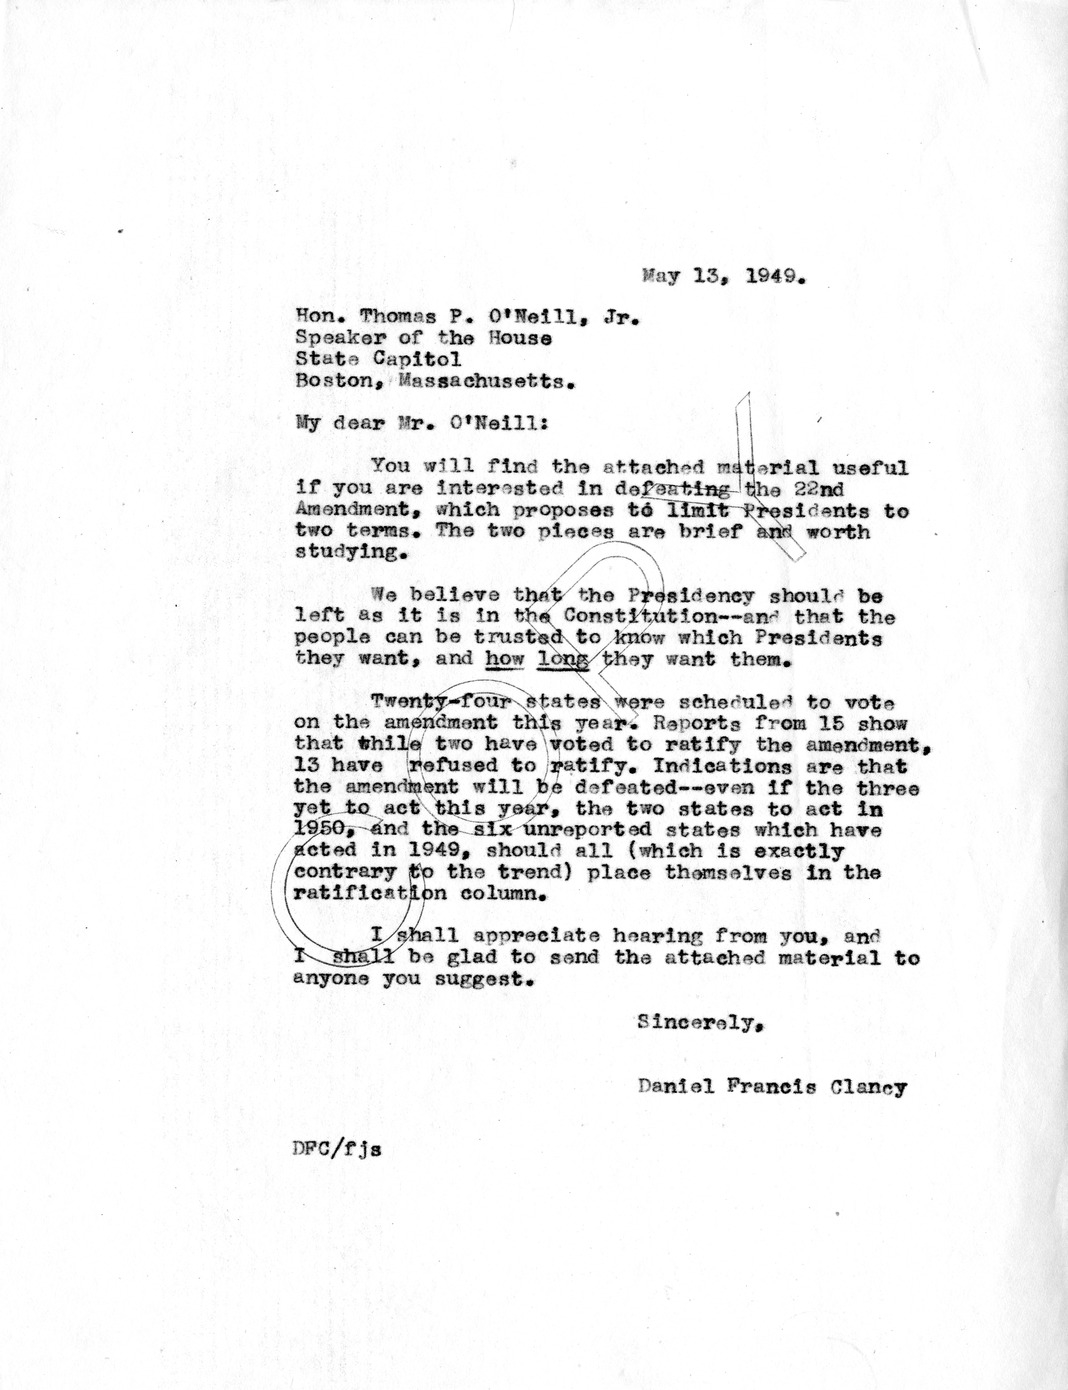 Letter from Daniel F. Clancy to the Honorable Thomas P. O'Neill, Jr.